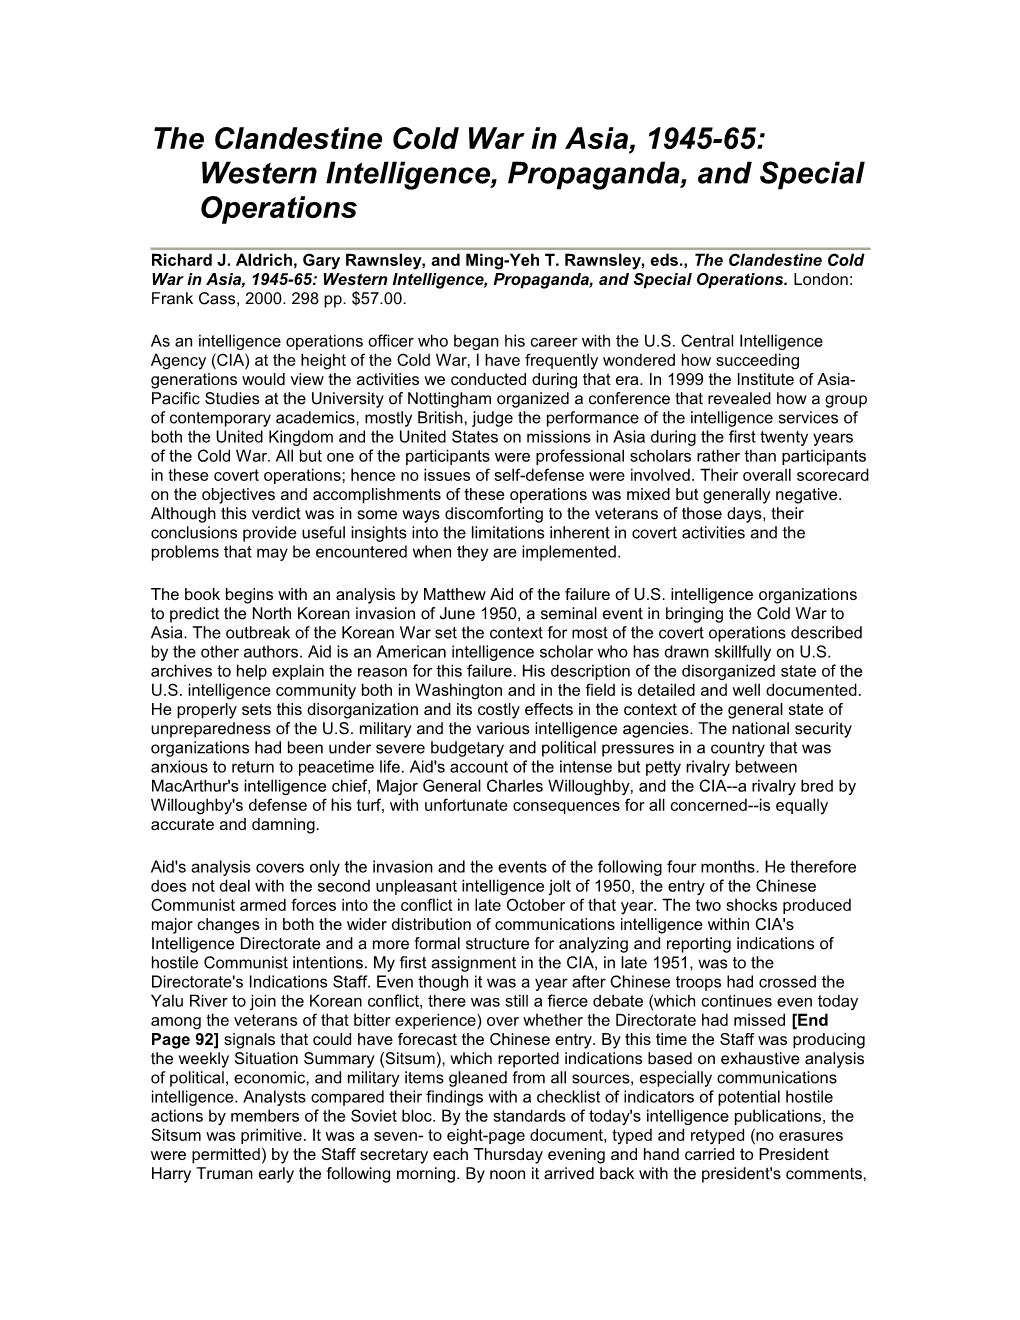 The Clandestine Cold War in Asia, 1945-65: Western Intelligence, Propaganda, and Special